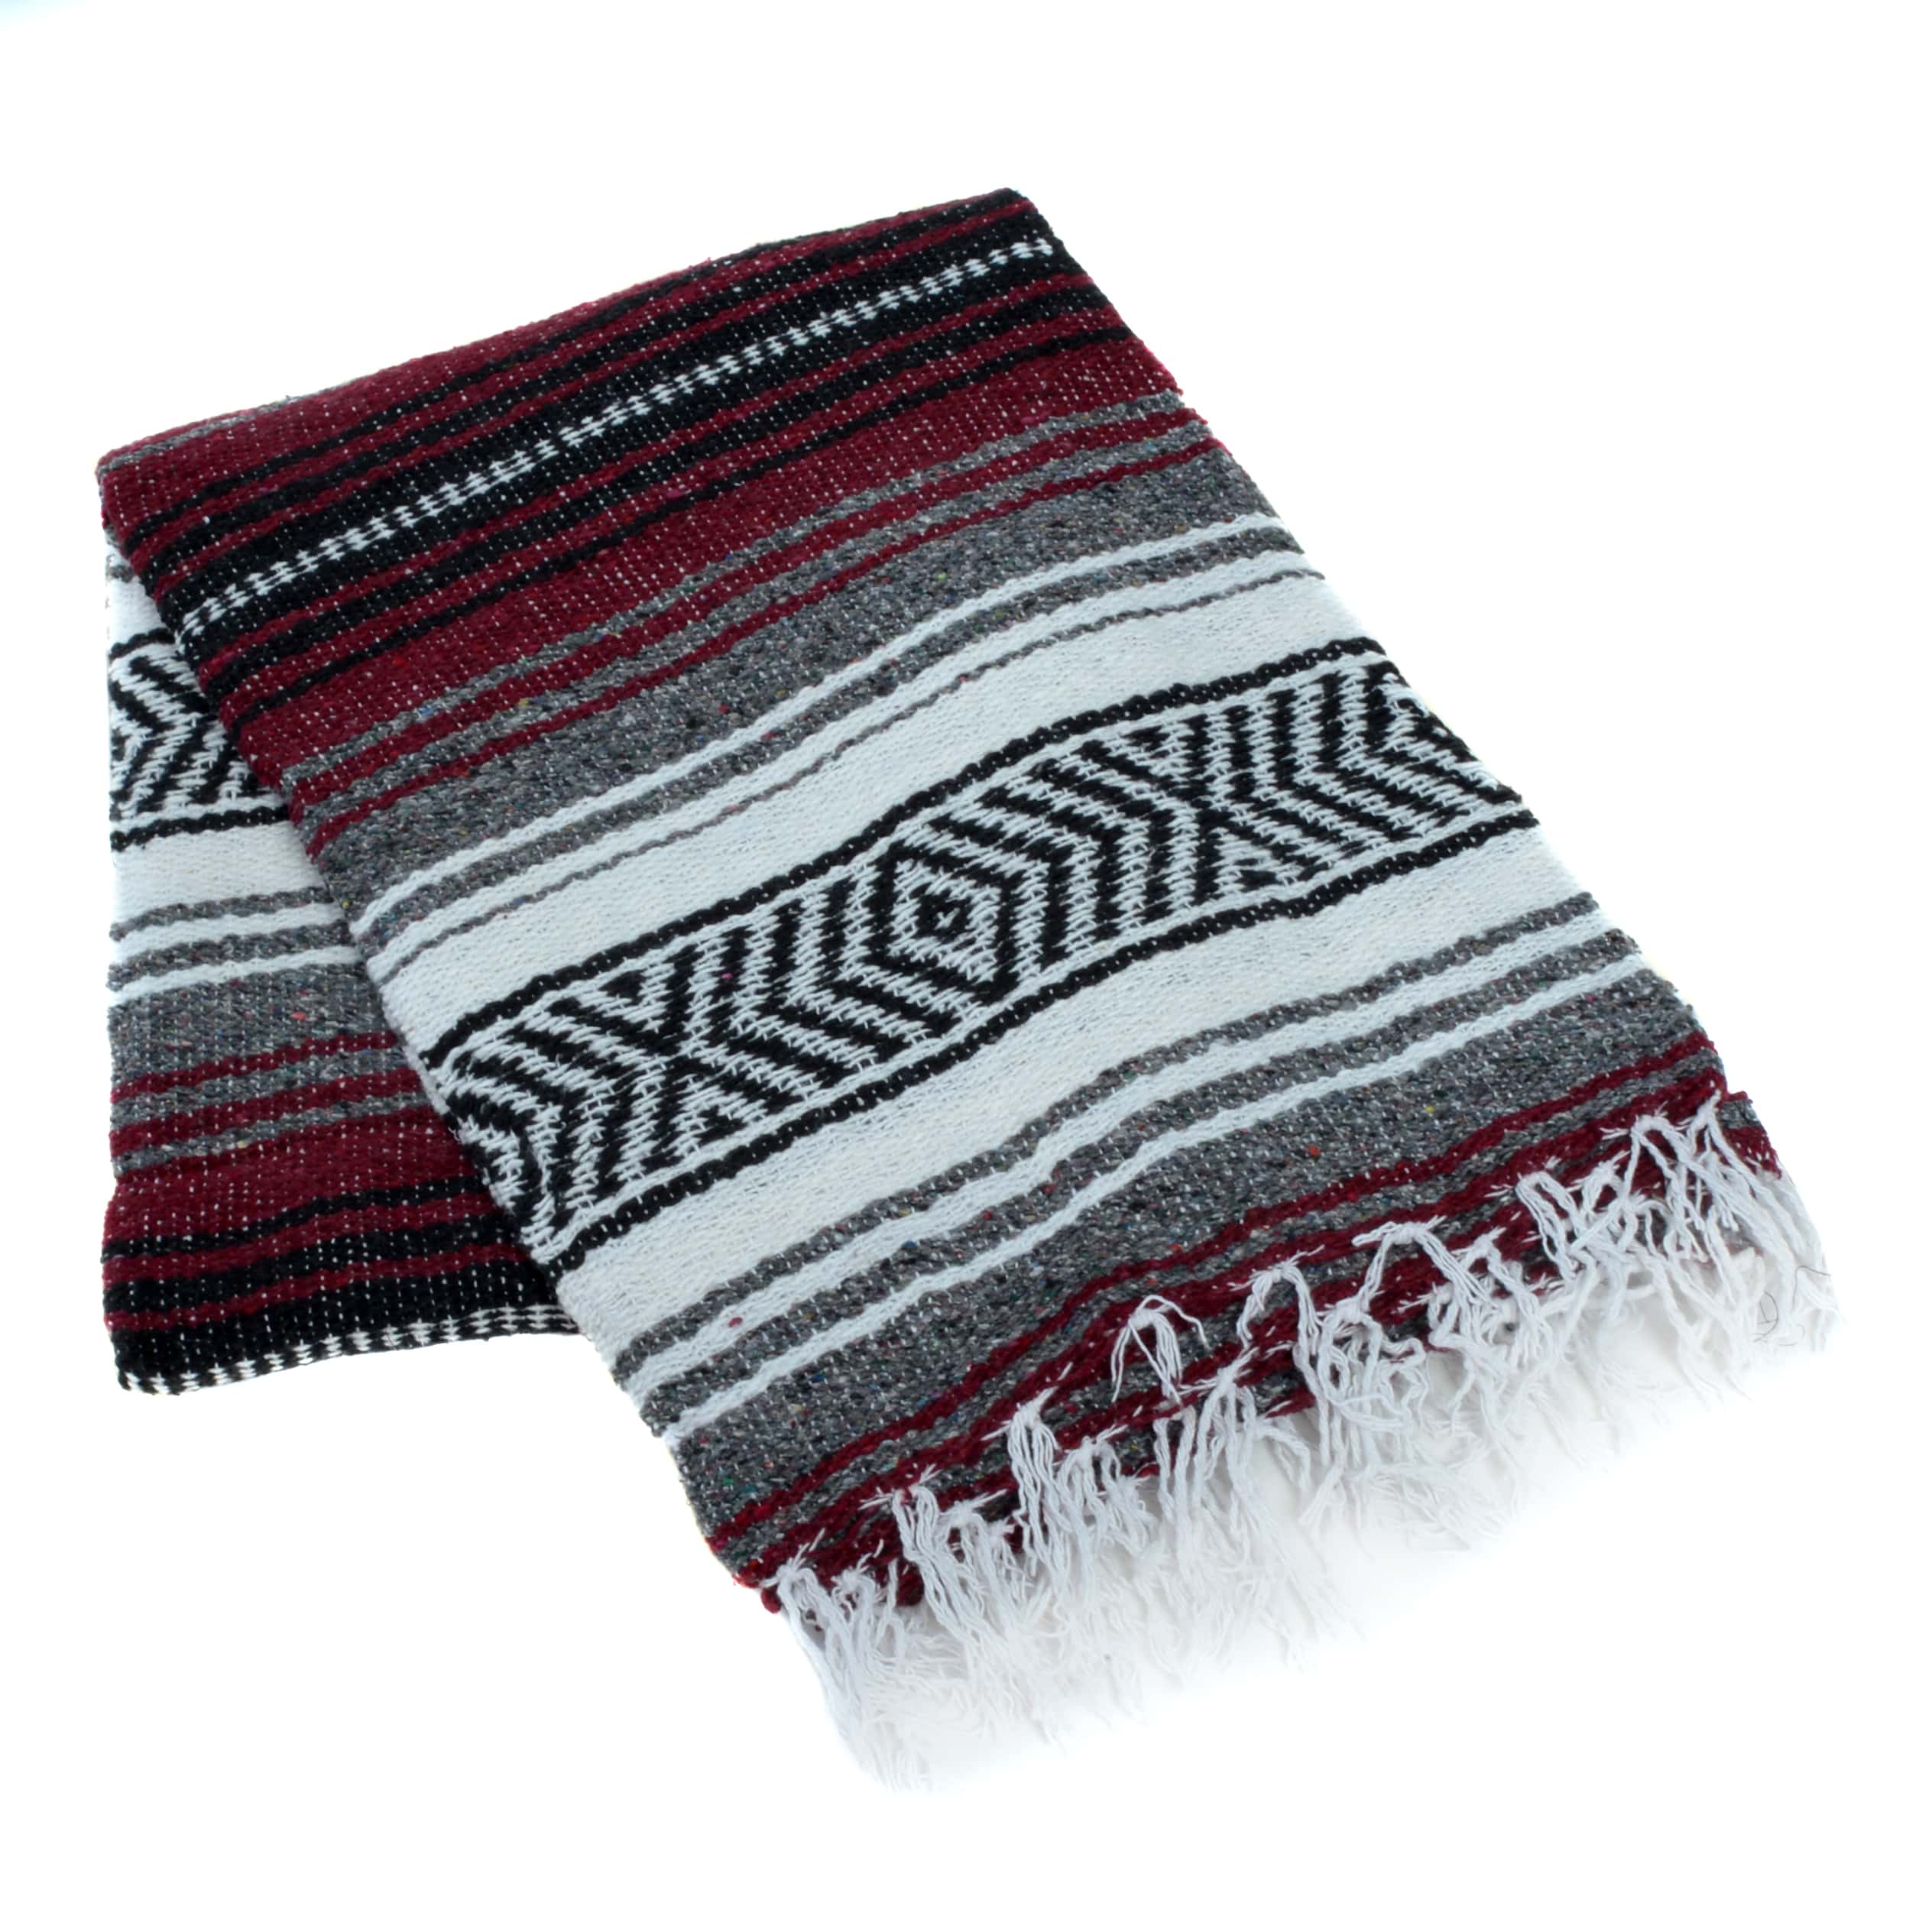 Classic Mexican Yoga Blankets by La Montana - 10 Pack